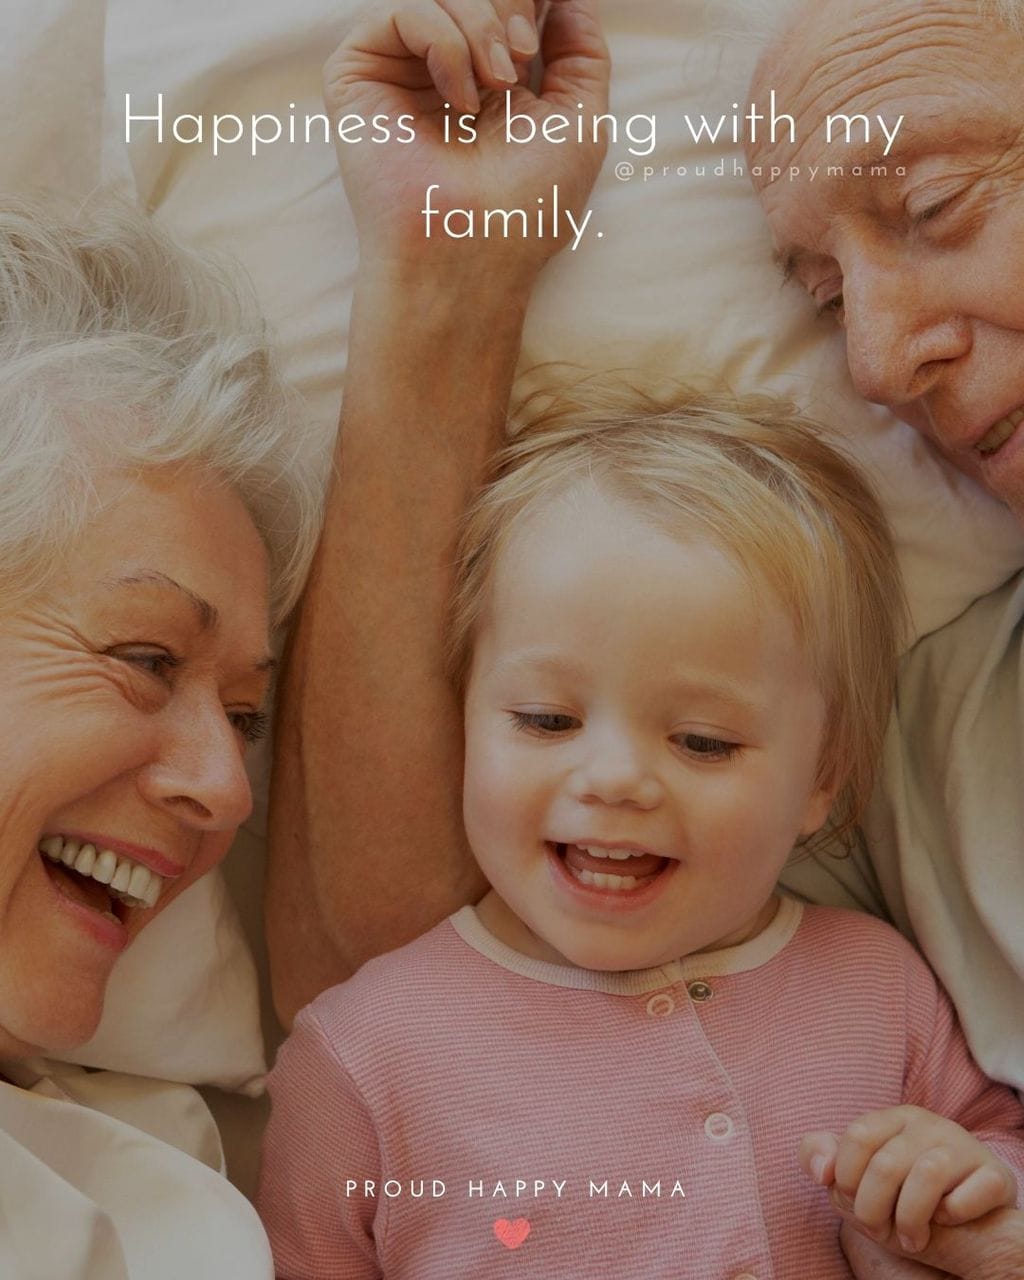 Quotes For Loving Family | Happiness is being with my family.